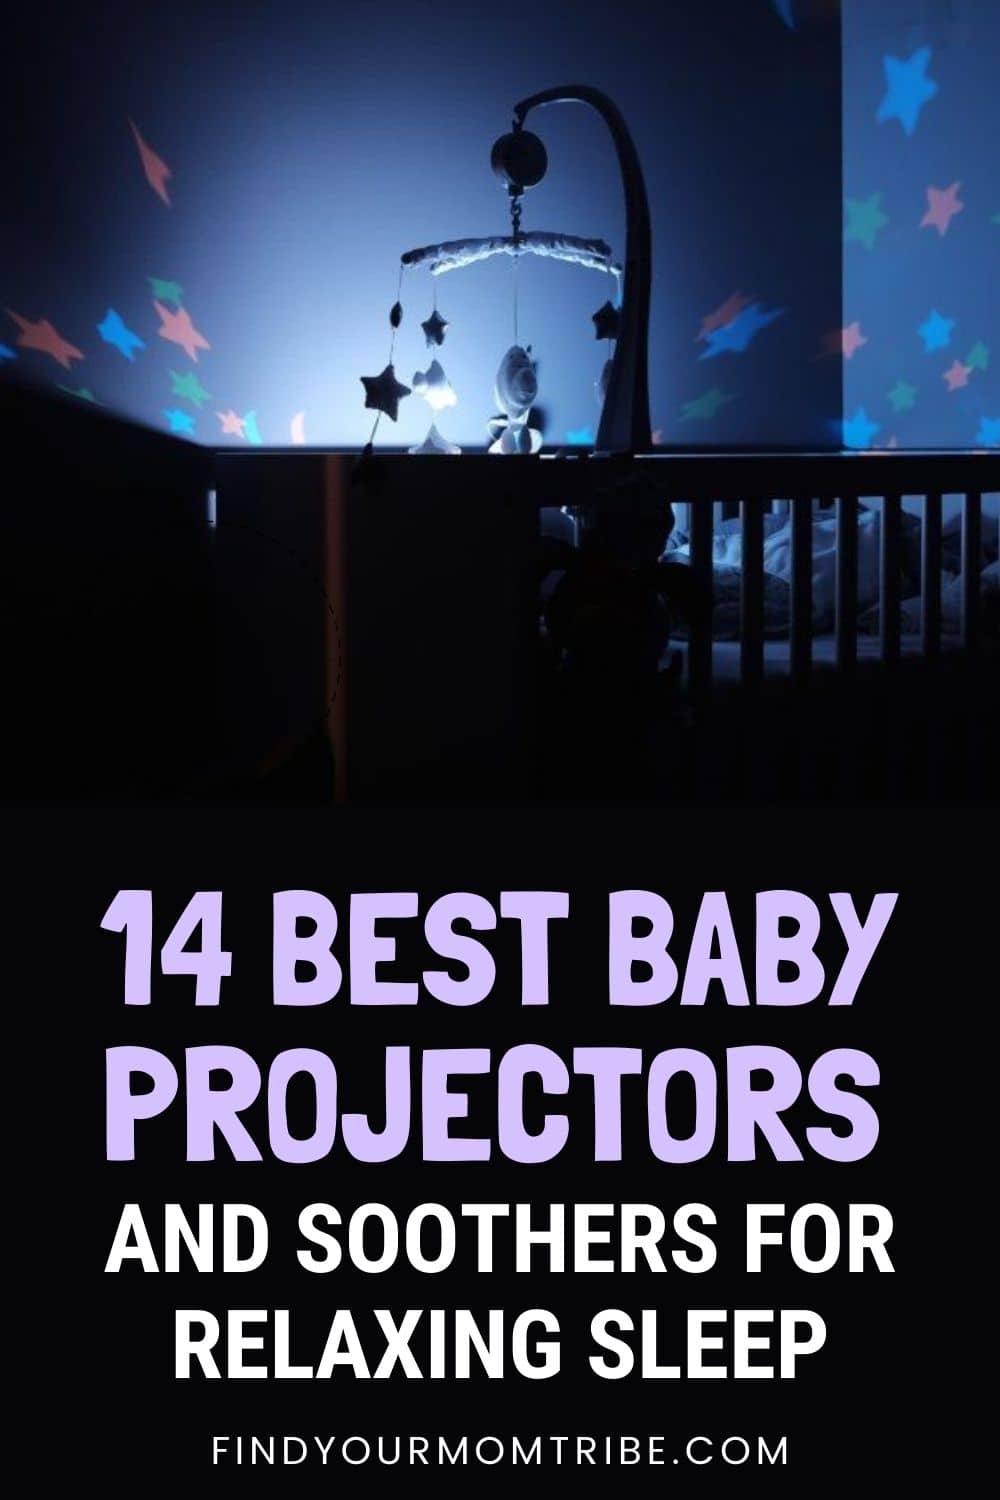 14 Best Baby Projectors And Soothers Of 2021 For Relaxing Sleep Pinterest